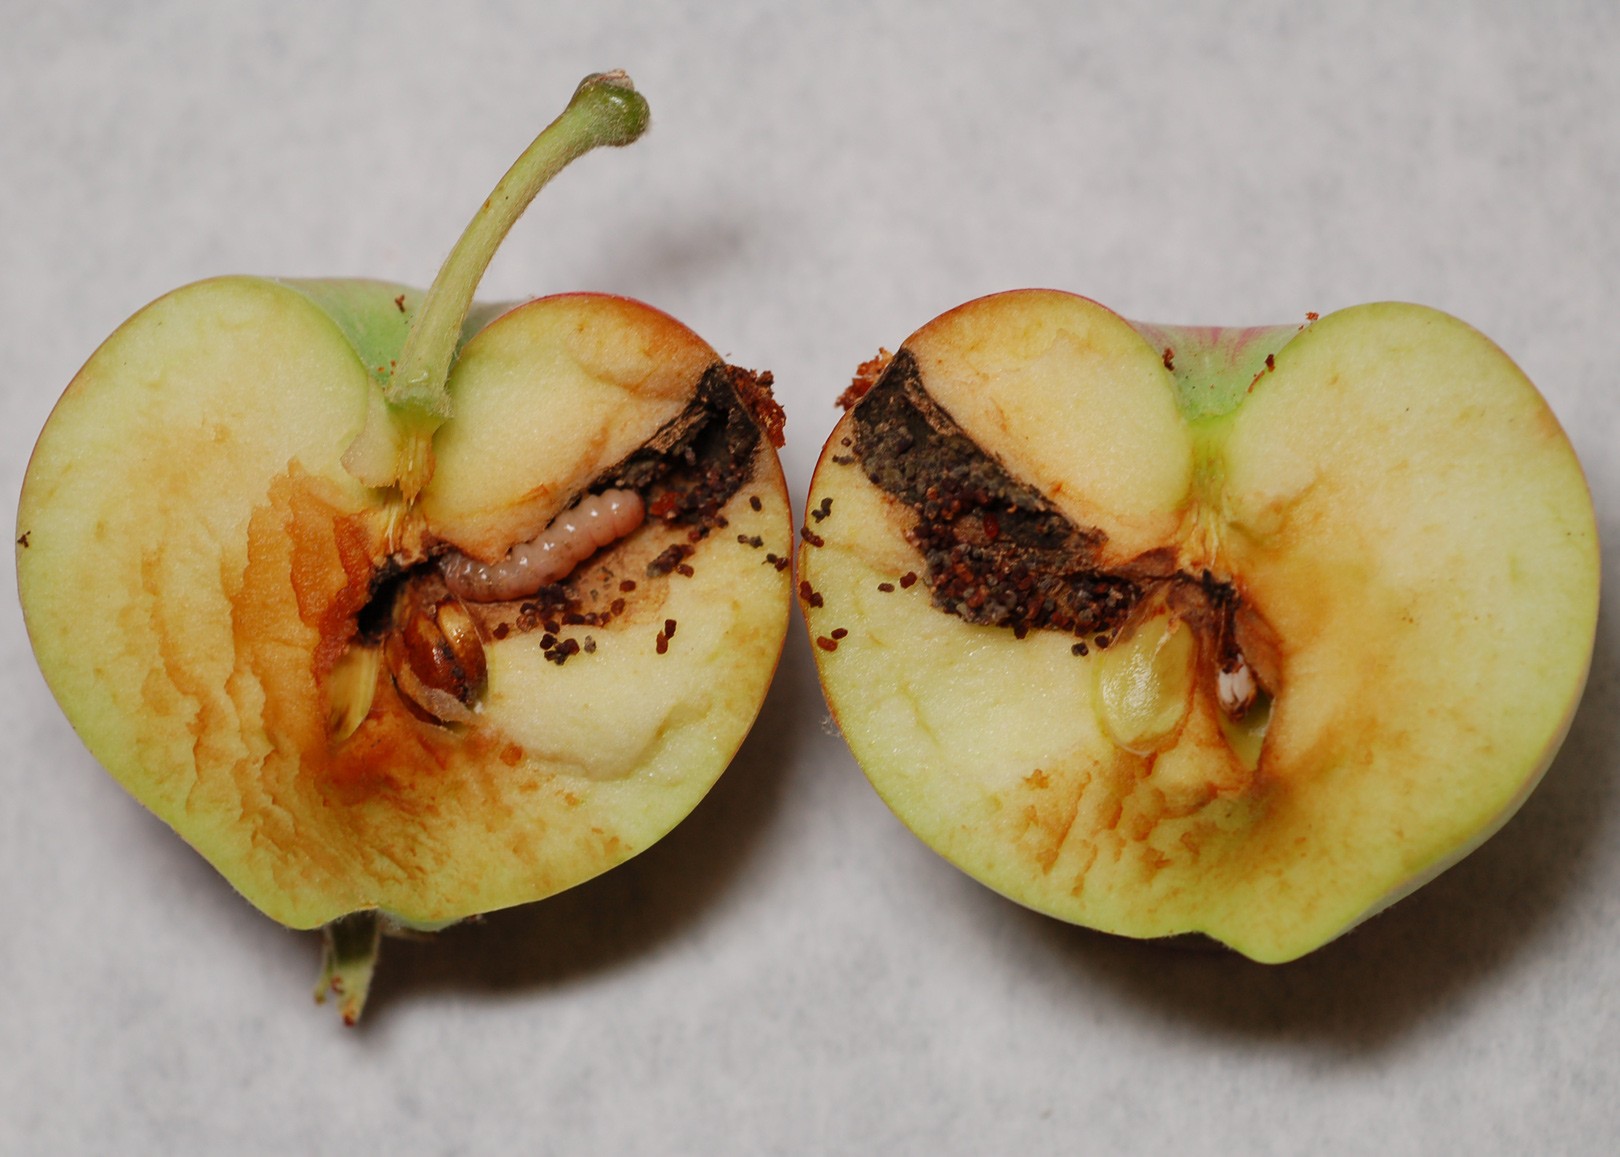 Perfecting Eden's fruit takes geneticists, AI, and some earwigs